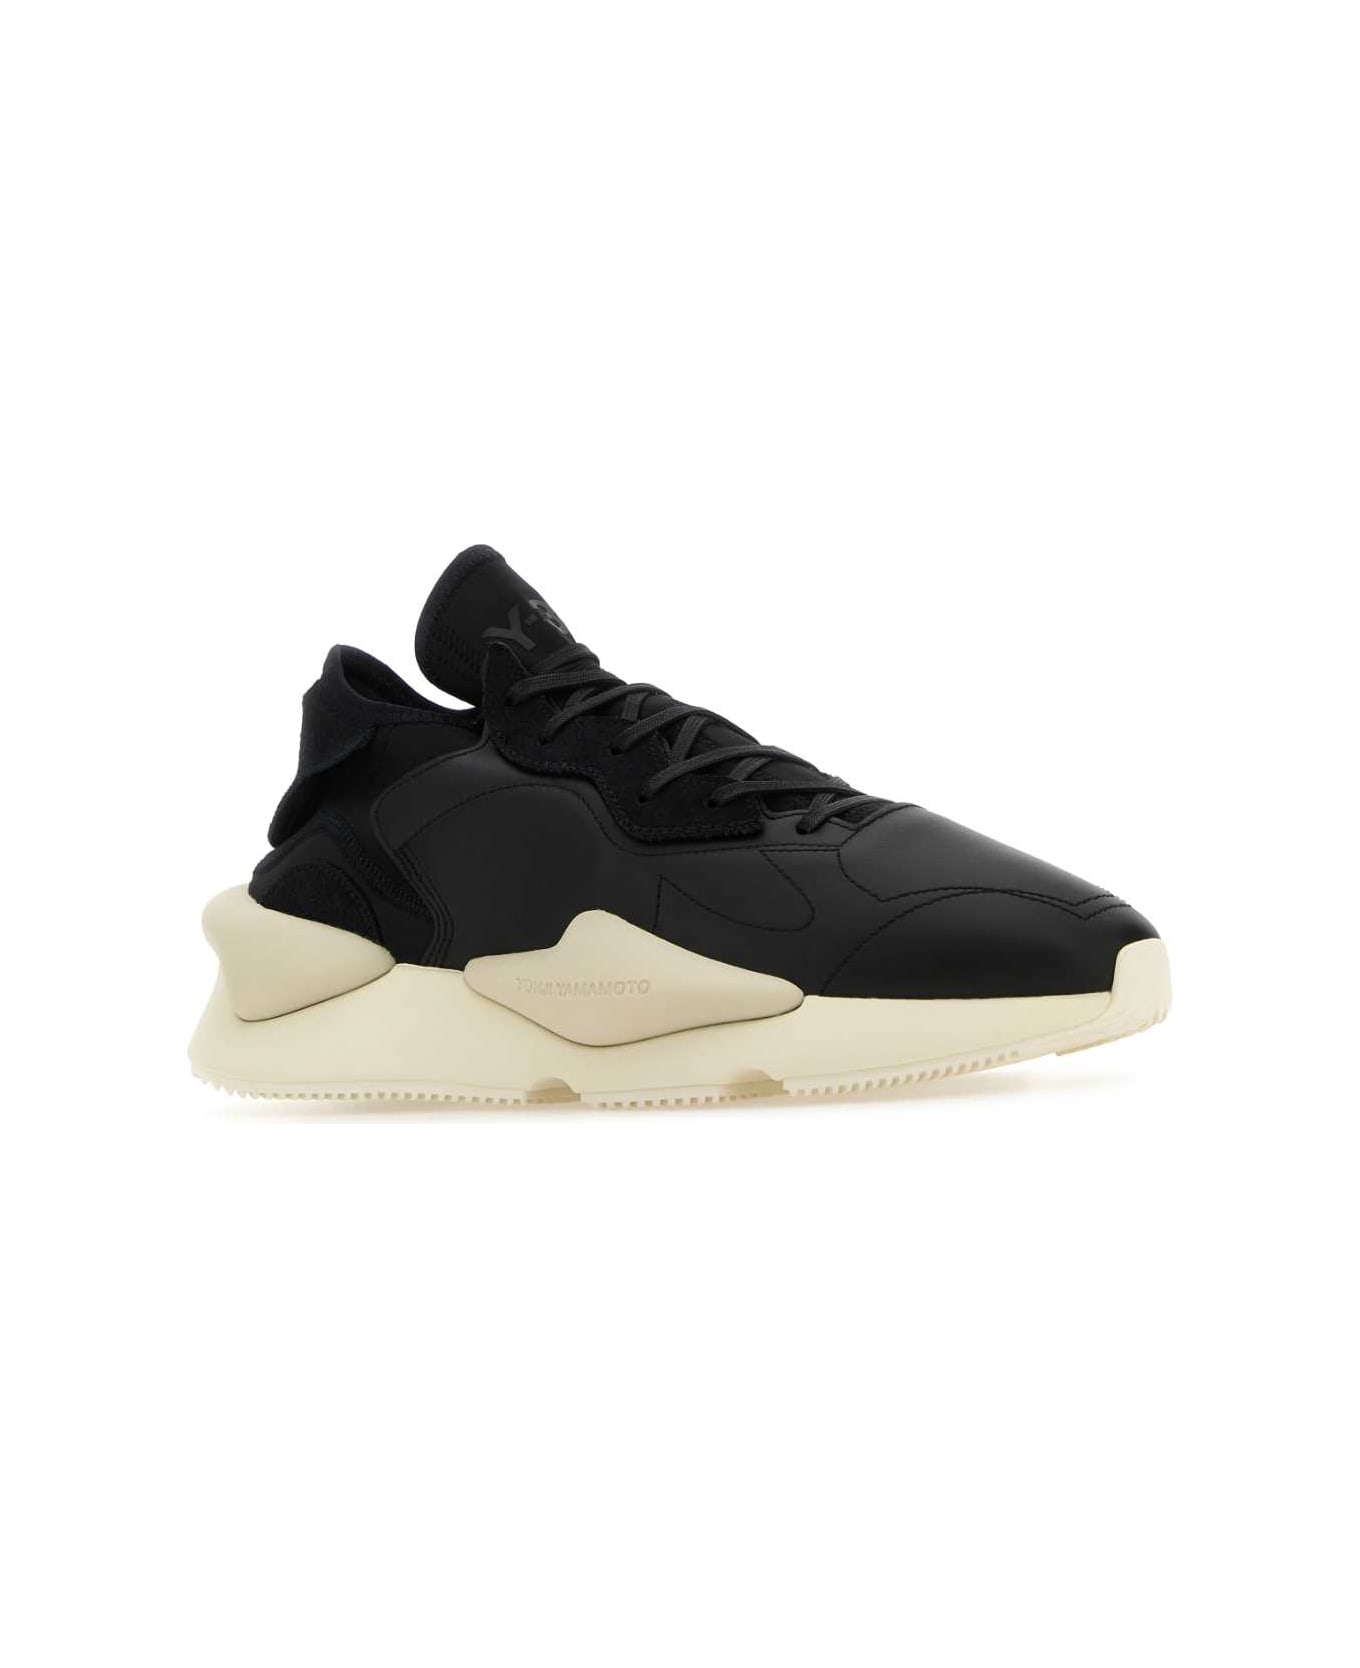 Y-3 Black Fabric And Leather Y-3 Kaiwa Sneakers - BLACKOFFWHITECLEARBROWN スニーカー